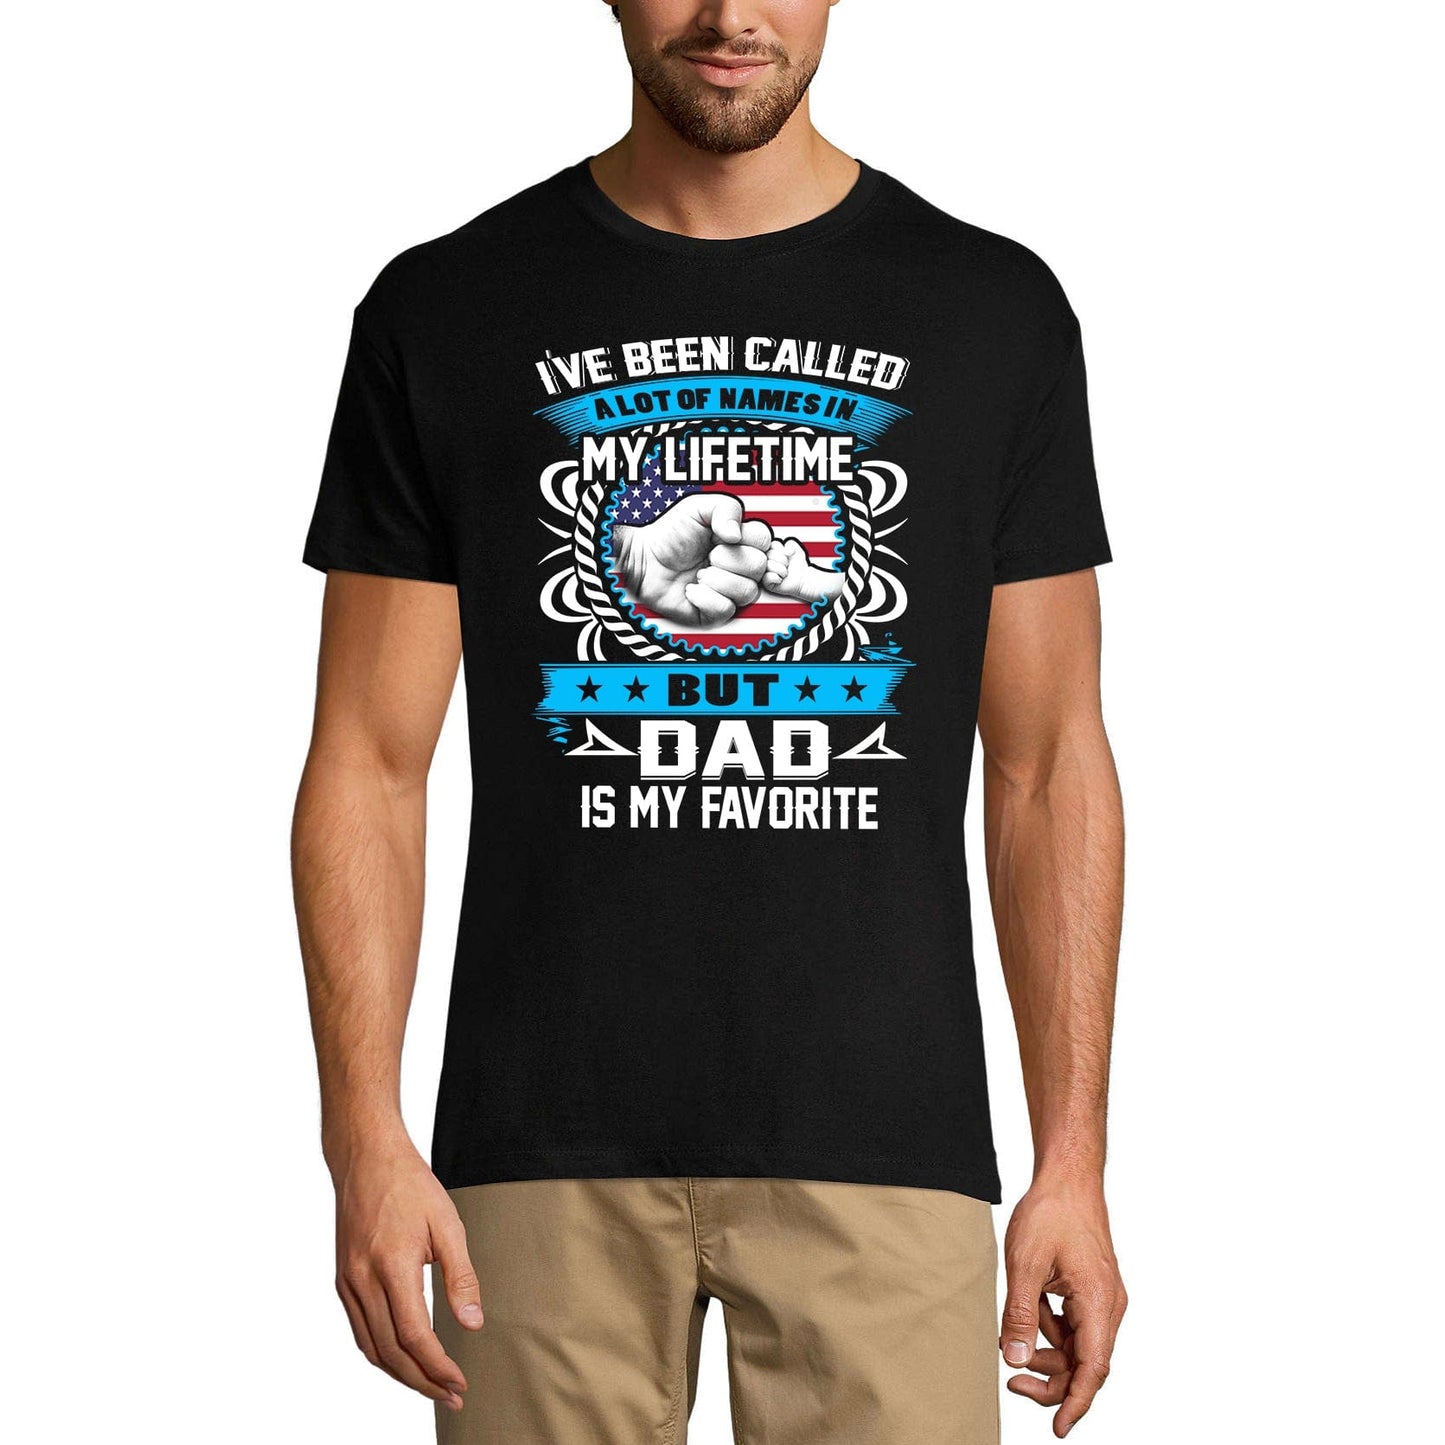 ULTRABASIC Men's Novelty T-Shirt Dad is My Favorite - Funny Father Tee Shirt